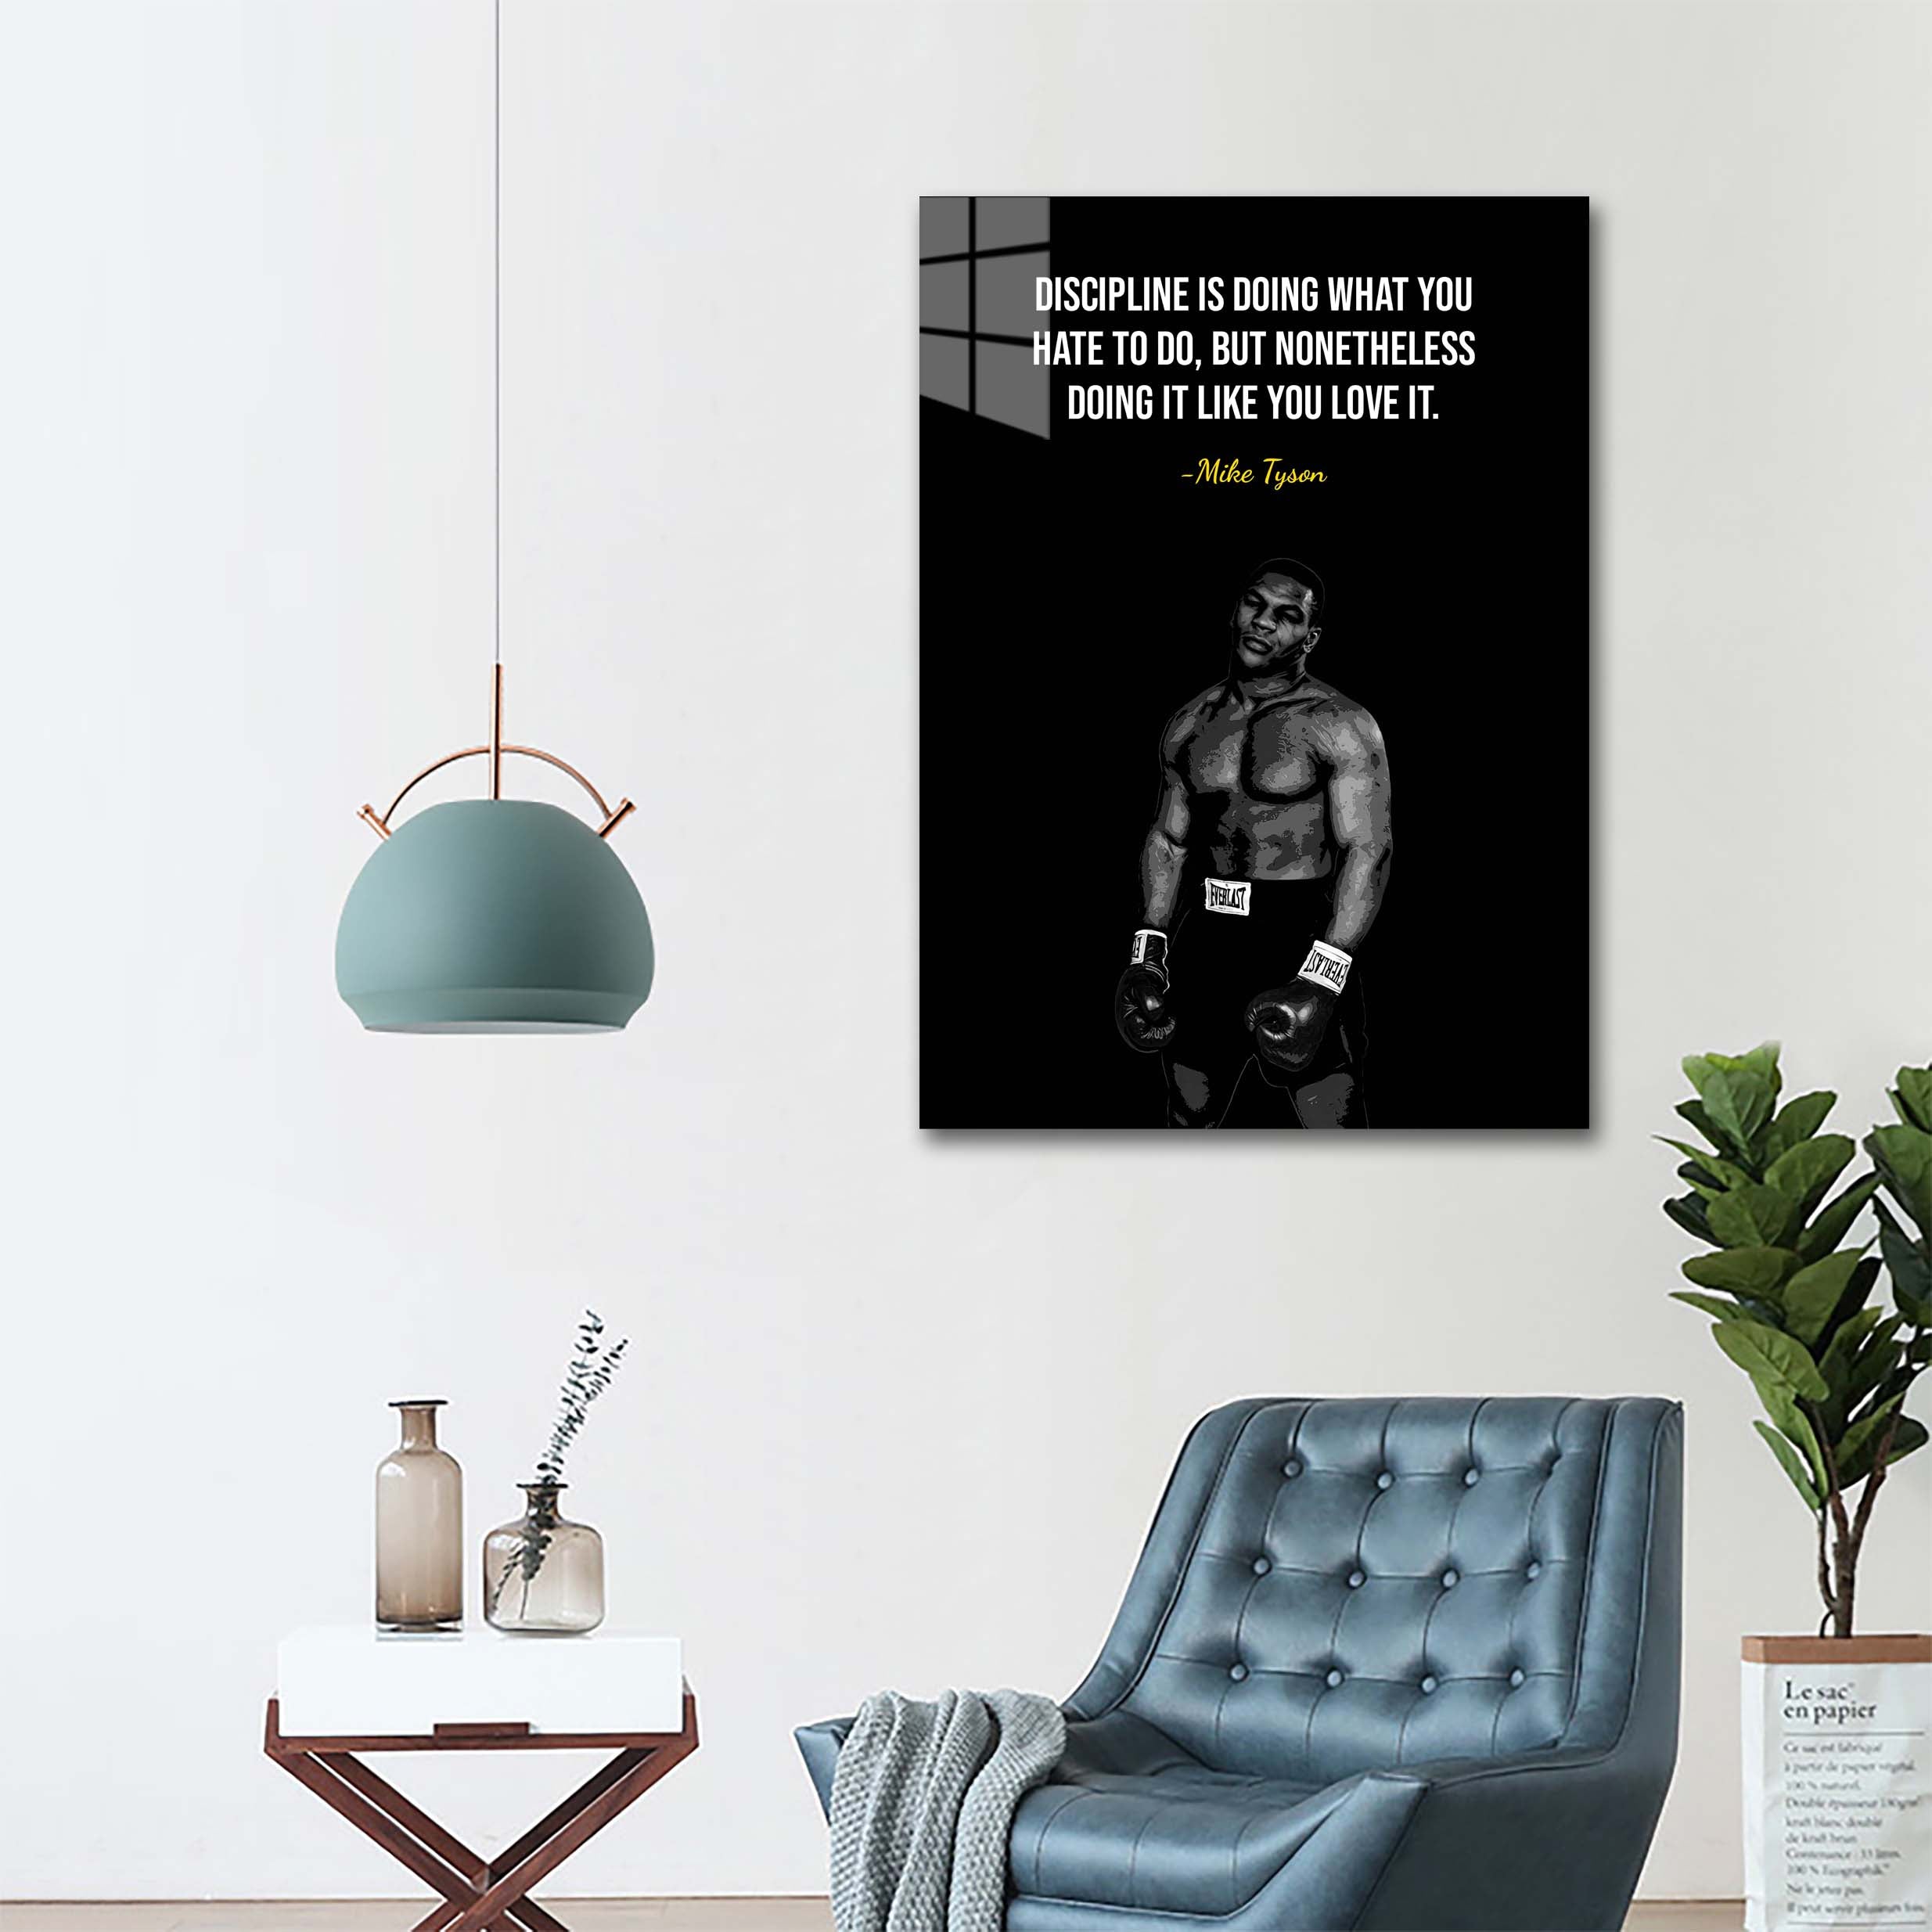 Mike Tyson quotes art-designed by @Pus Meong art